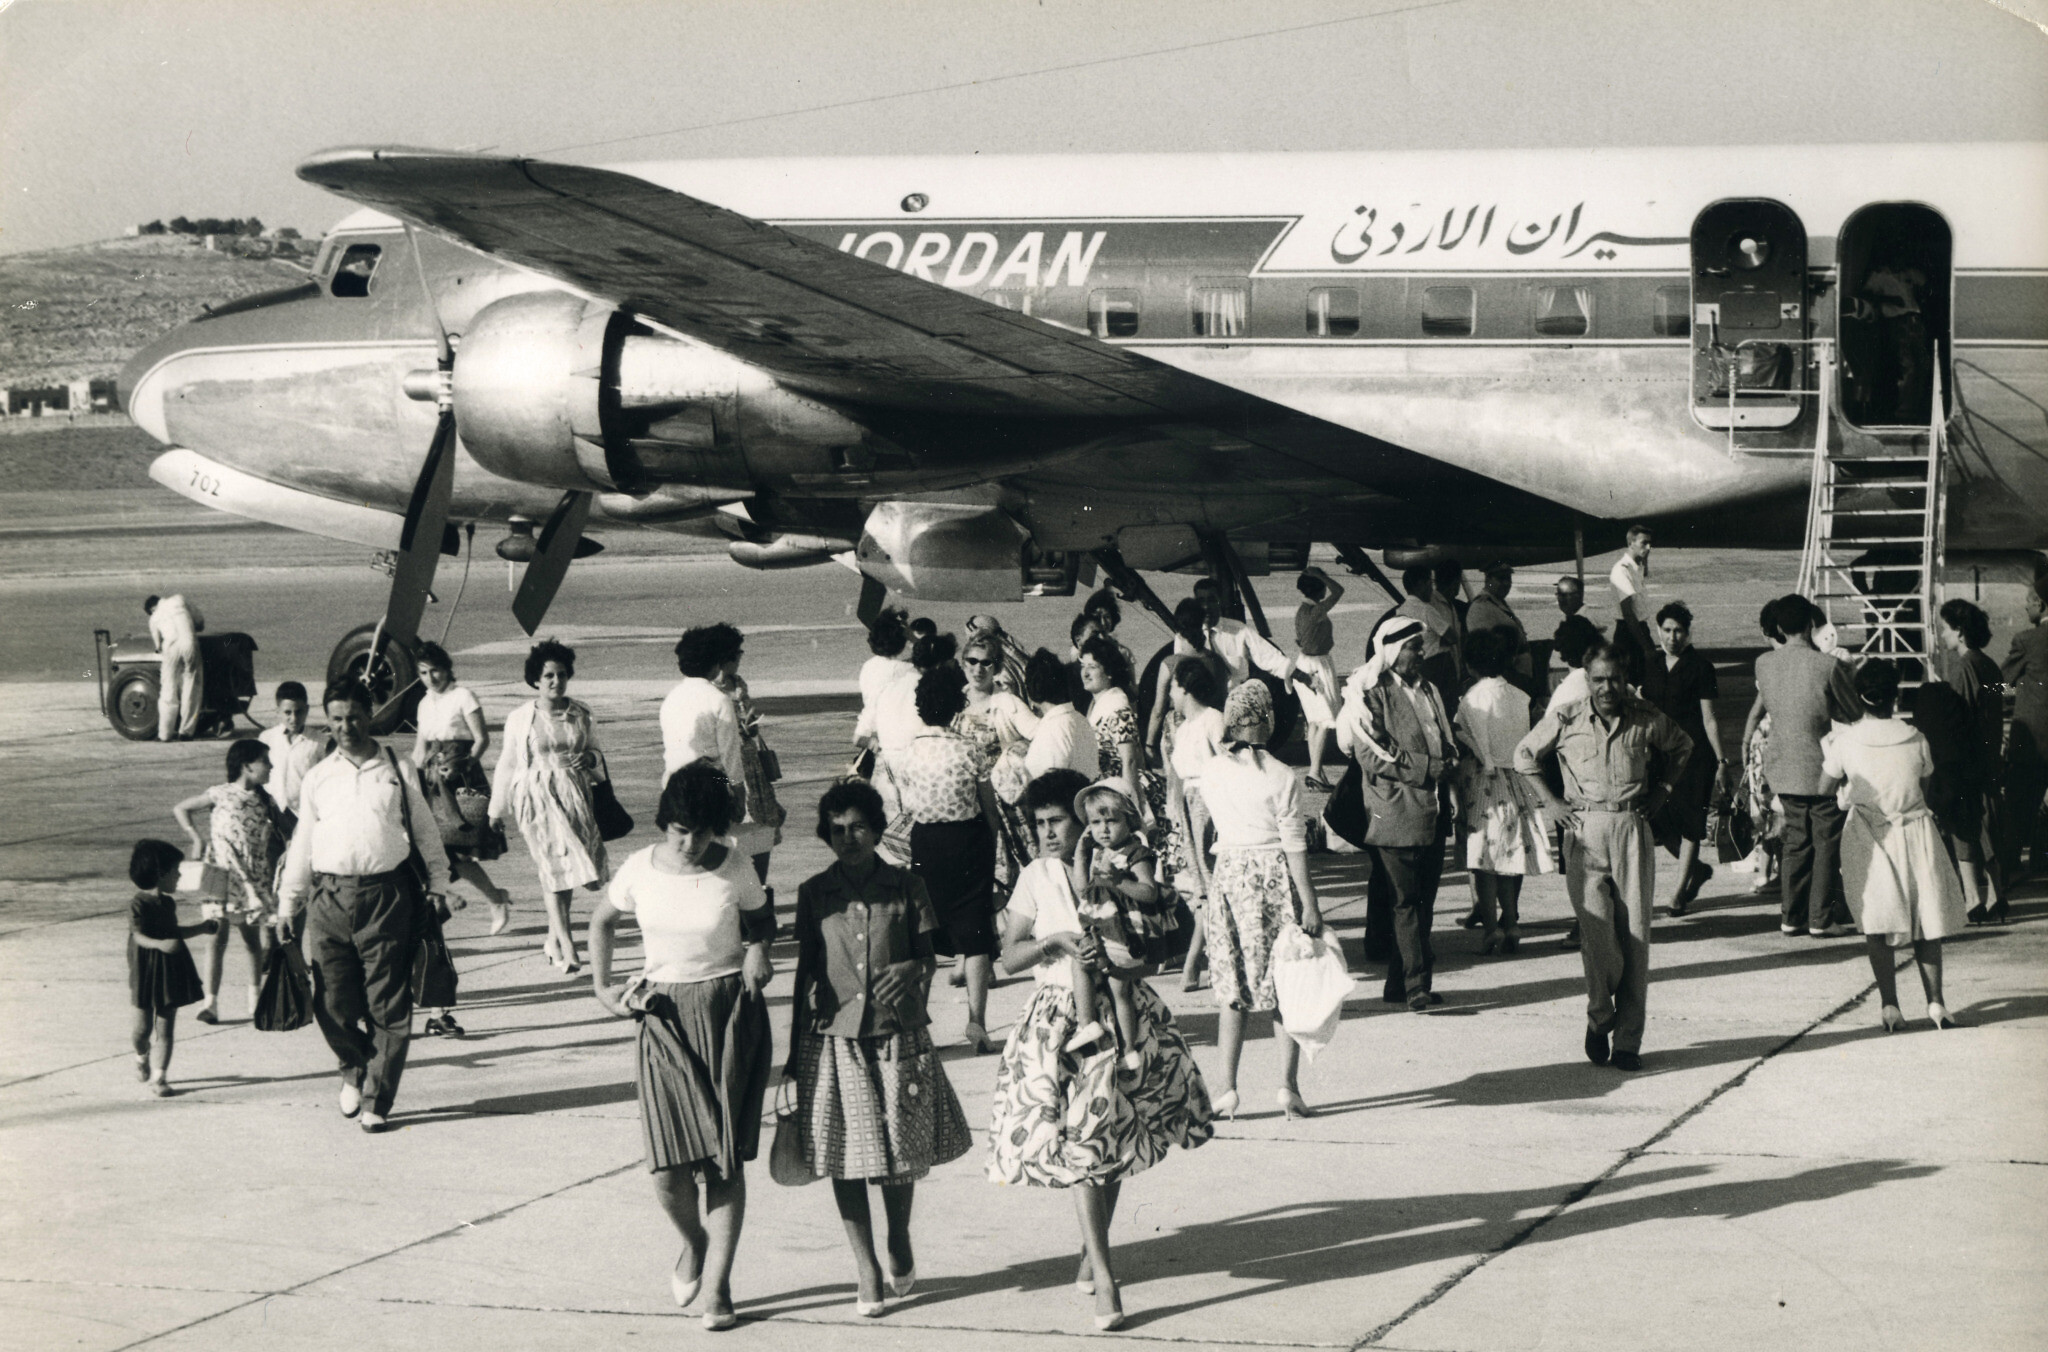 Pilgrims and other travelers arriving at Jerusalem Airport in the 1960s (Dr. Mohammed Al-Qutob Family Archive / From the exhibition "Gateway to the World: Jerusalem Airport 1948-1967")